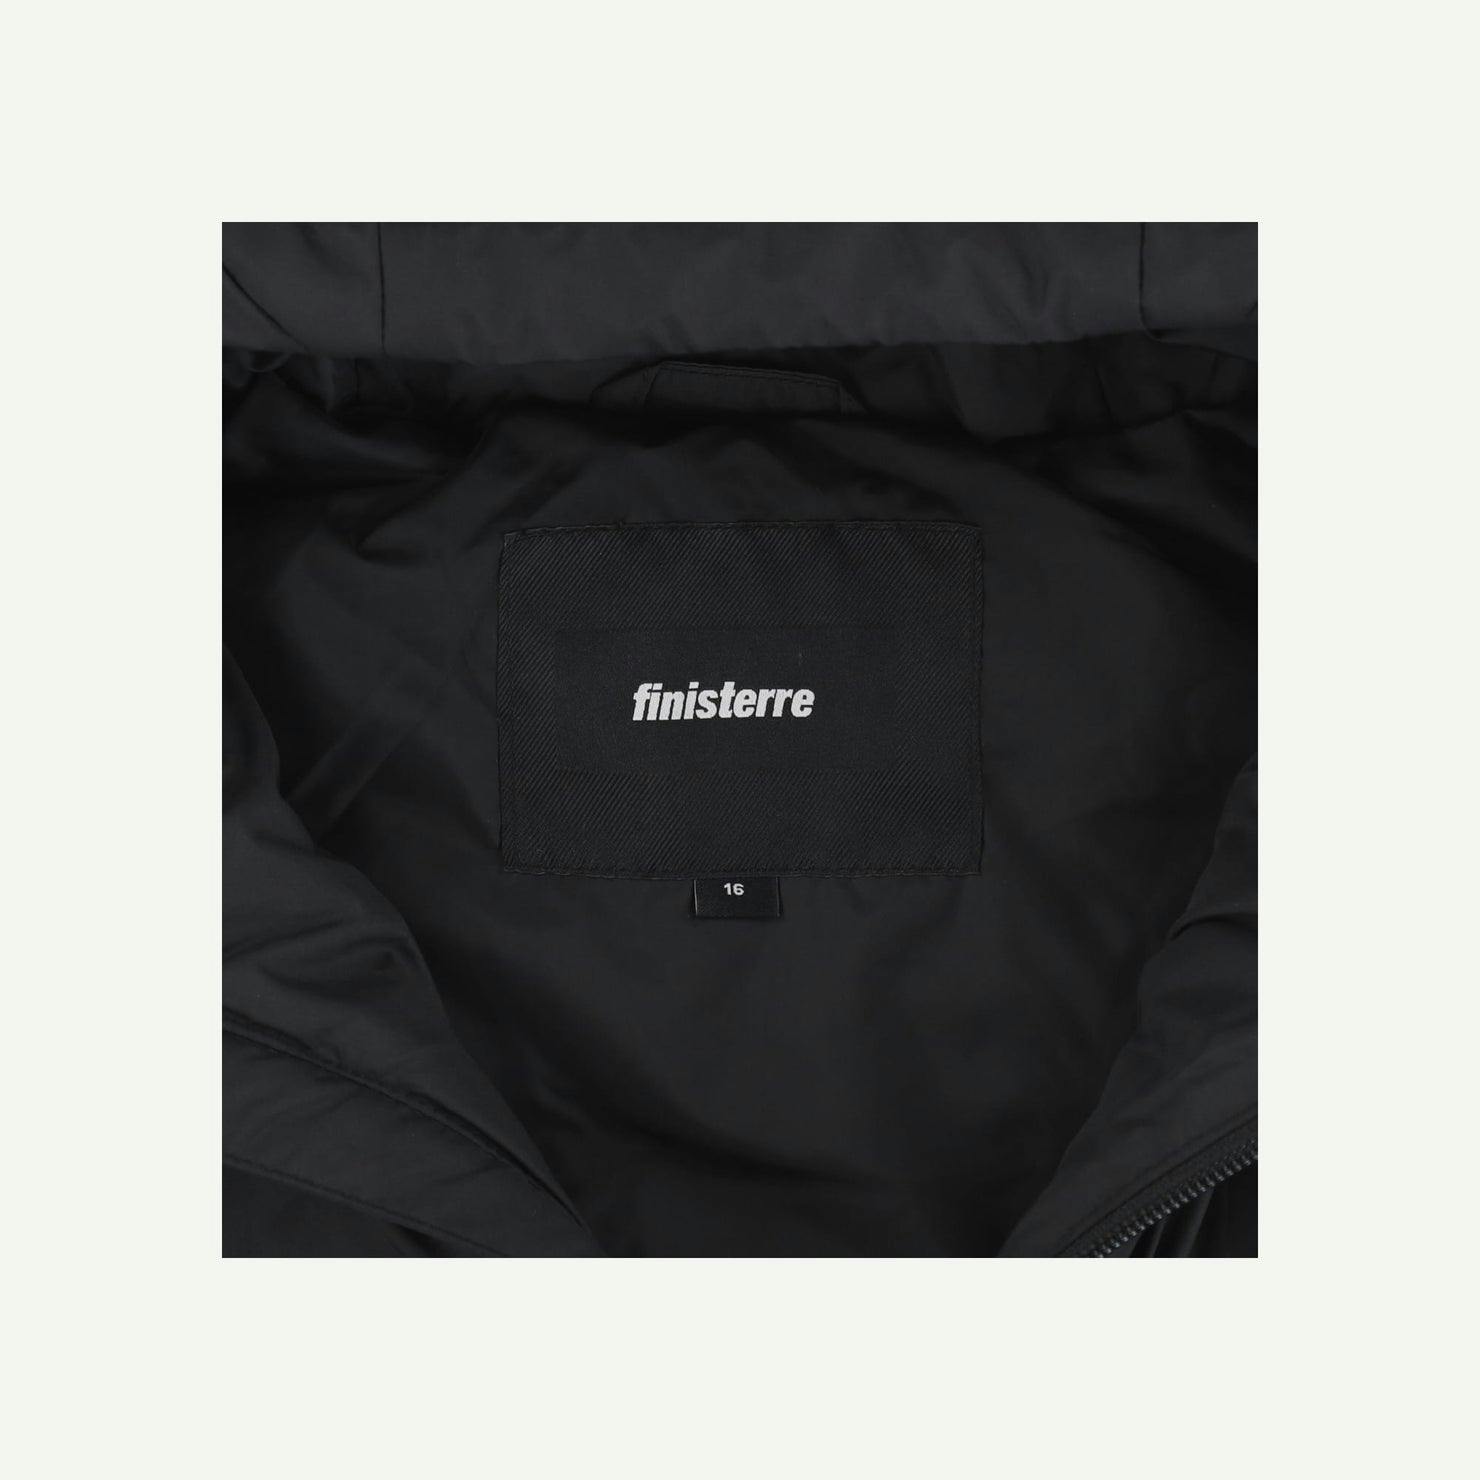 Finisterre Repaired Black Jacket